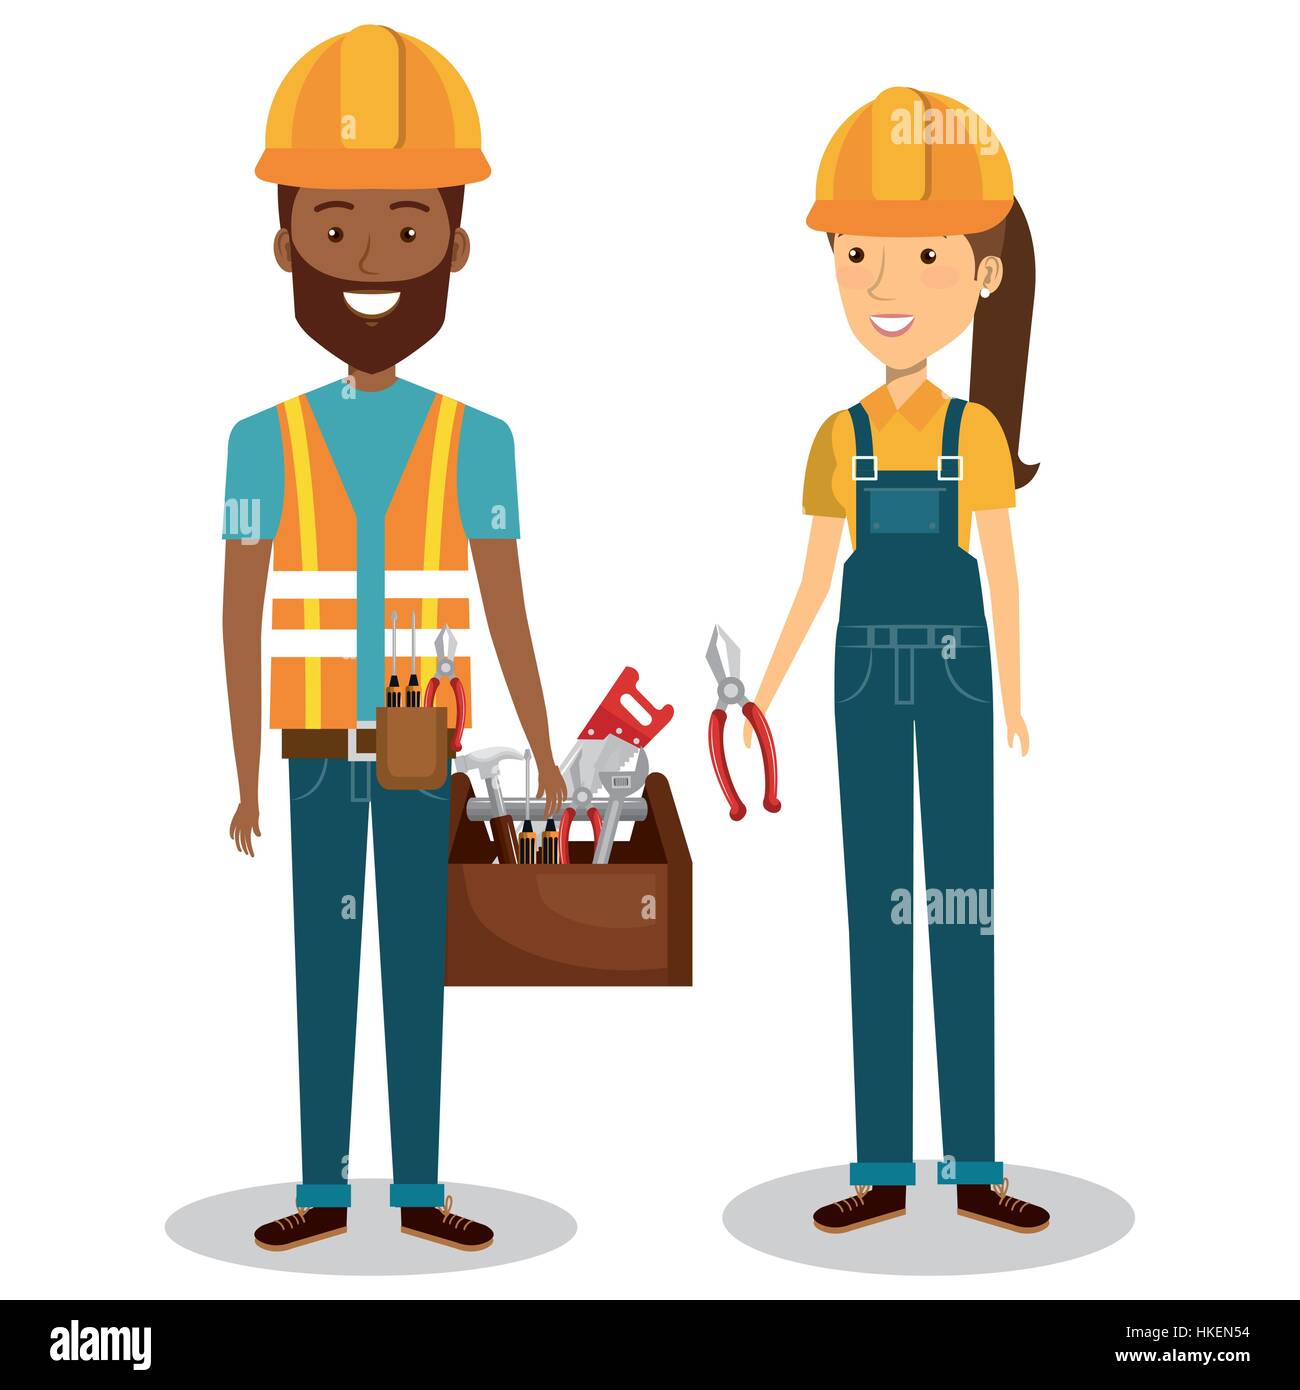 Builders Group Avatars Characters Vector Illustration Design Stock